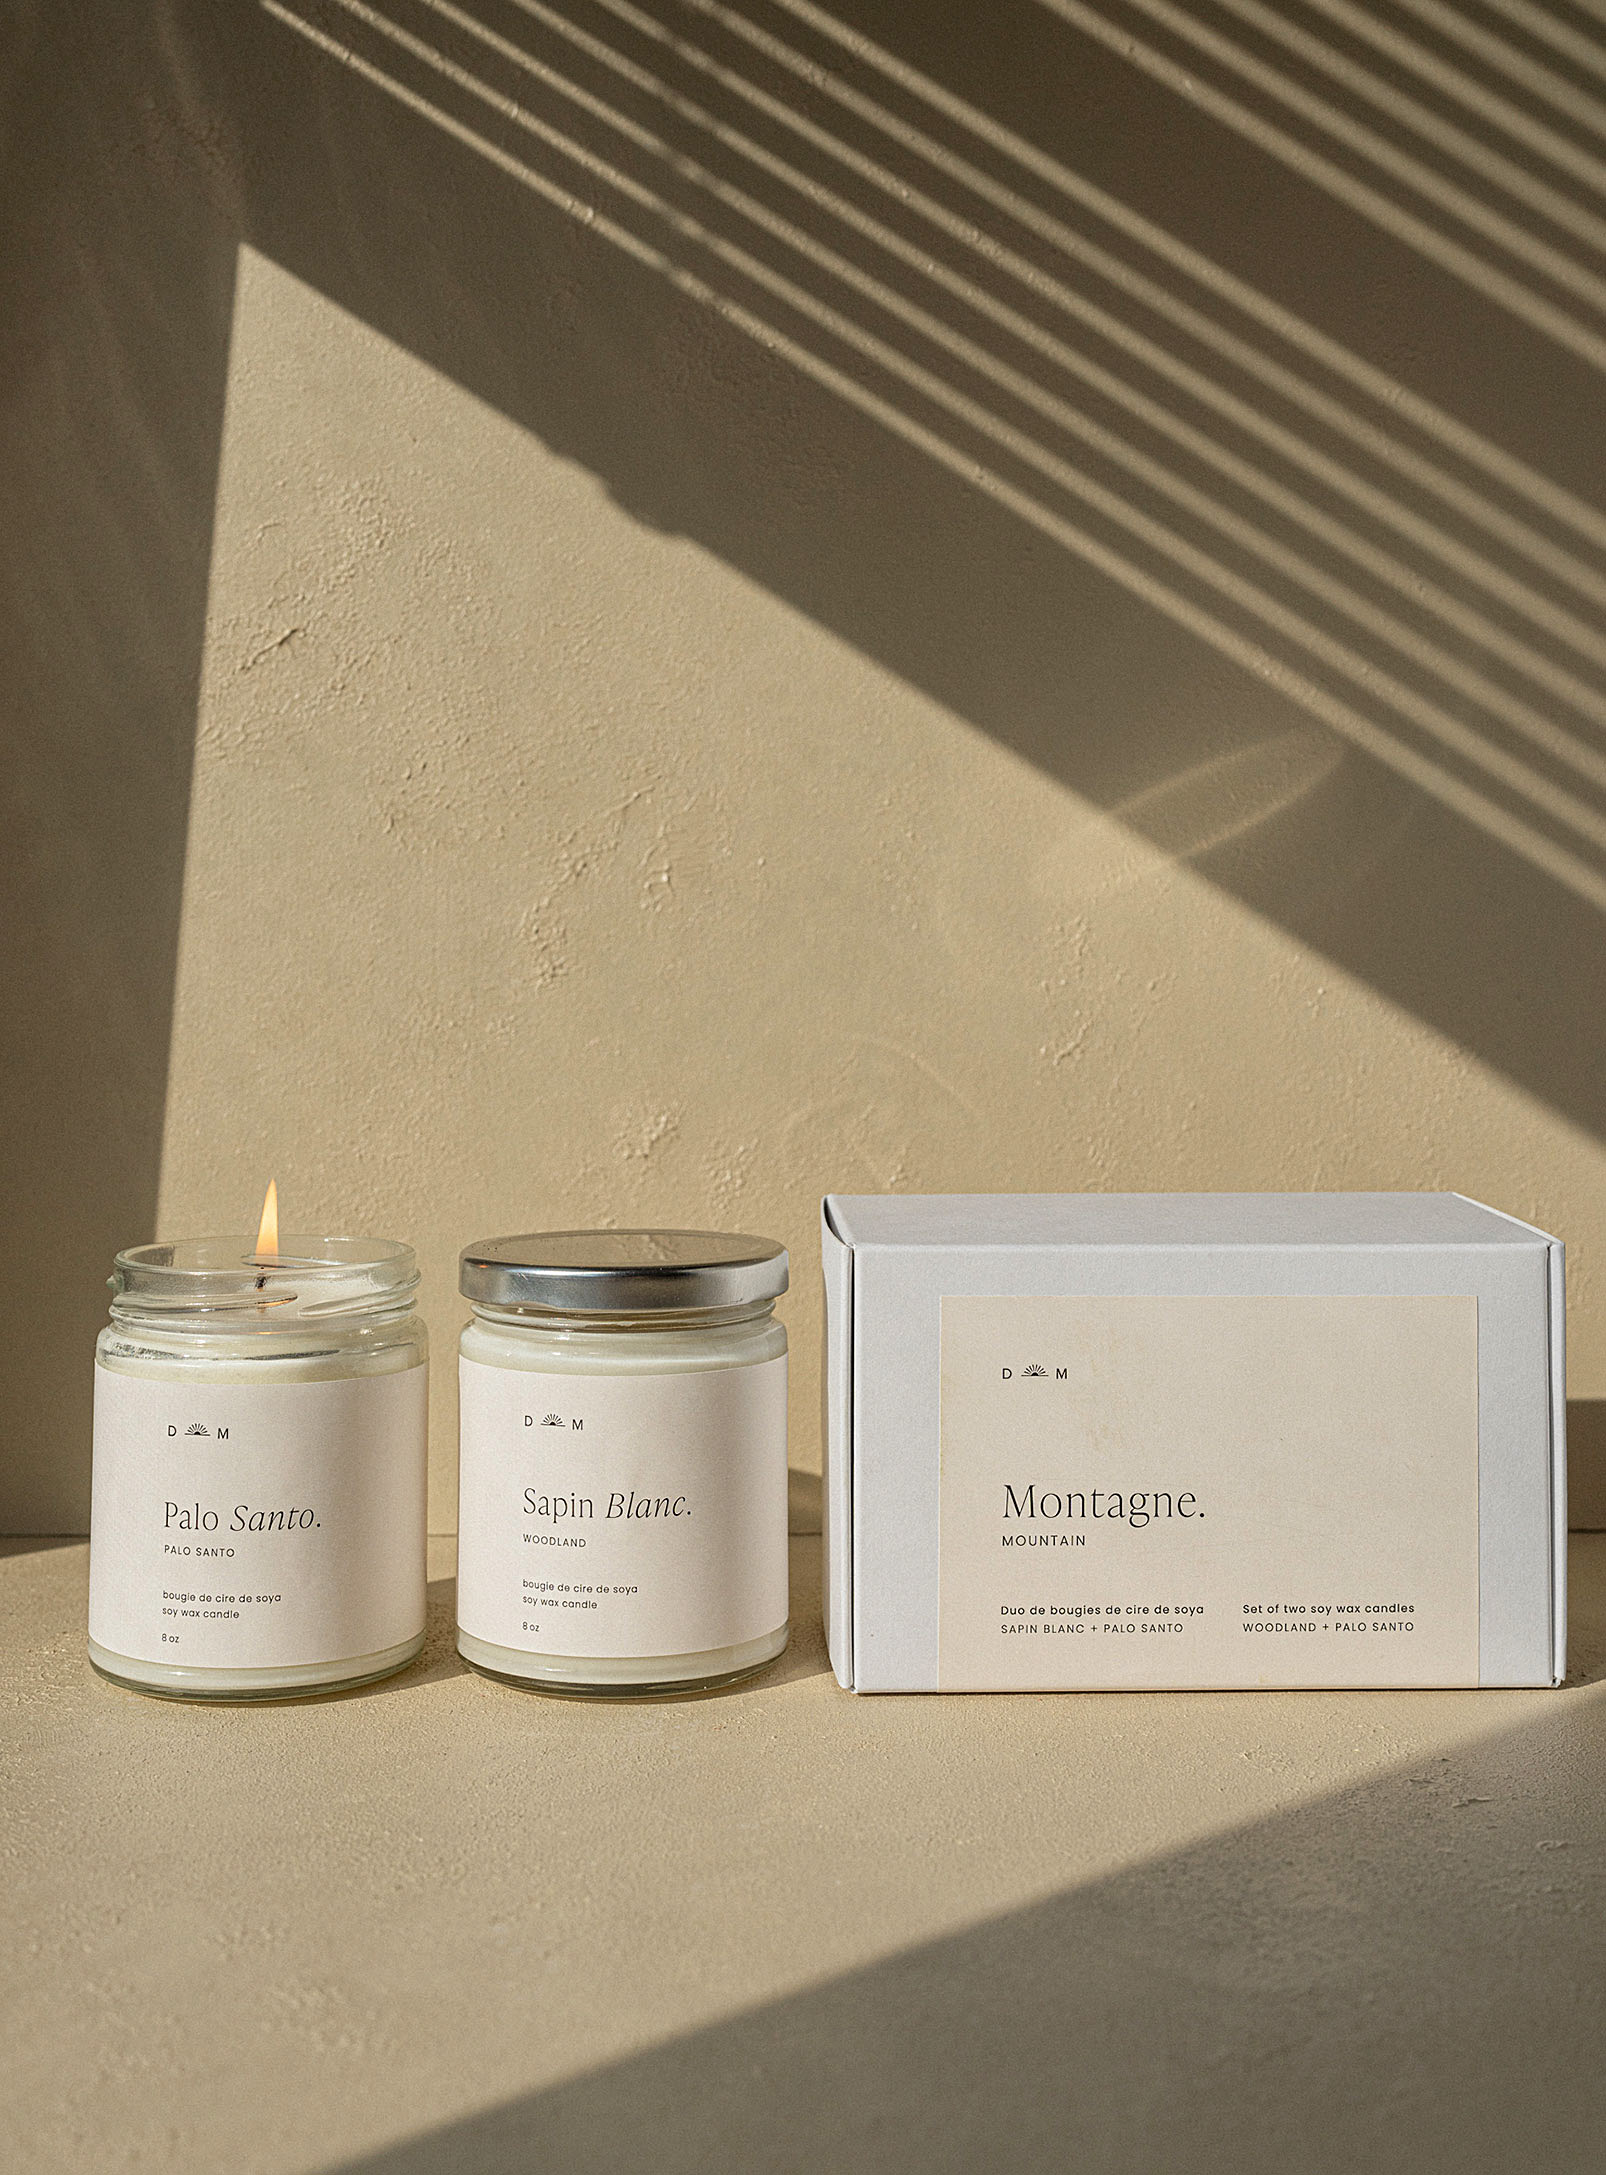 Dimanche Matin - Moutain candle set White fir and palo santo